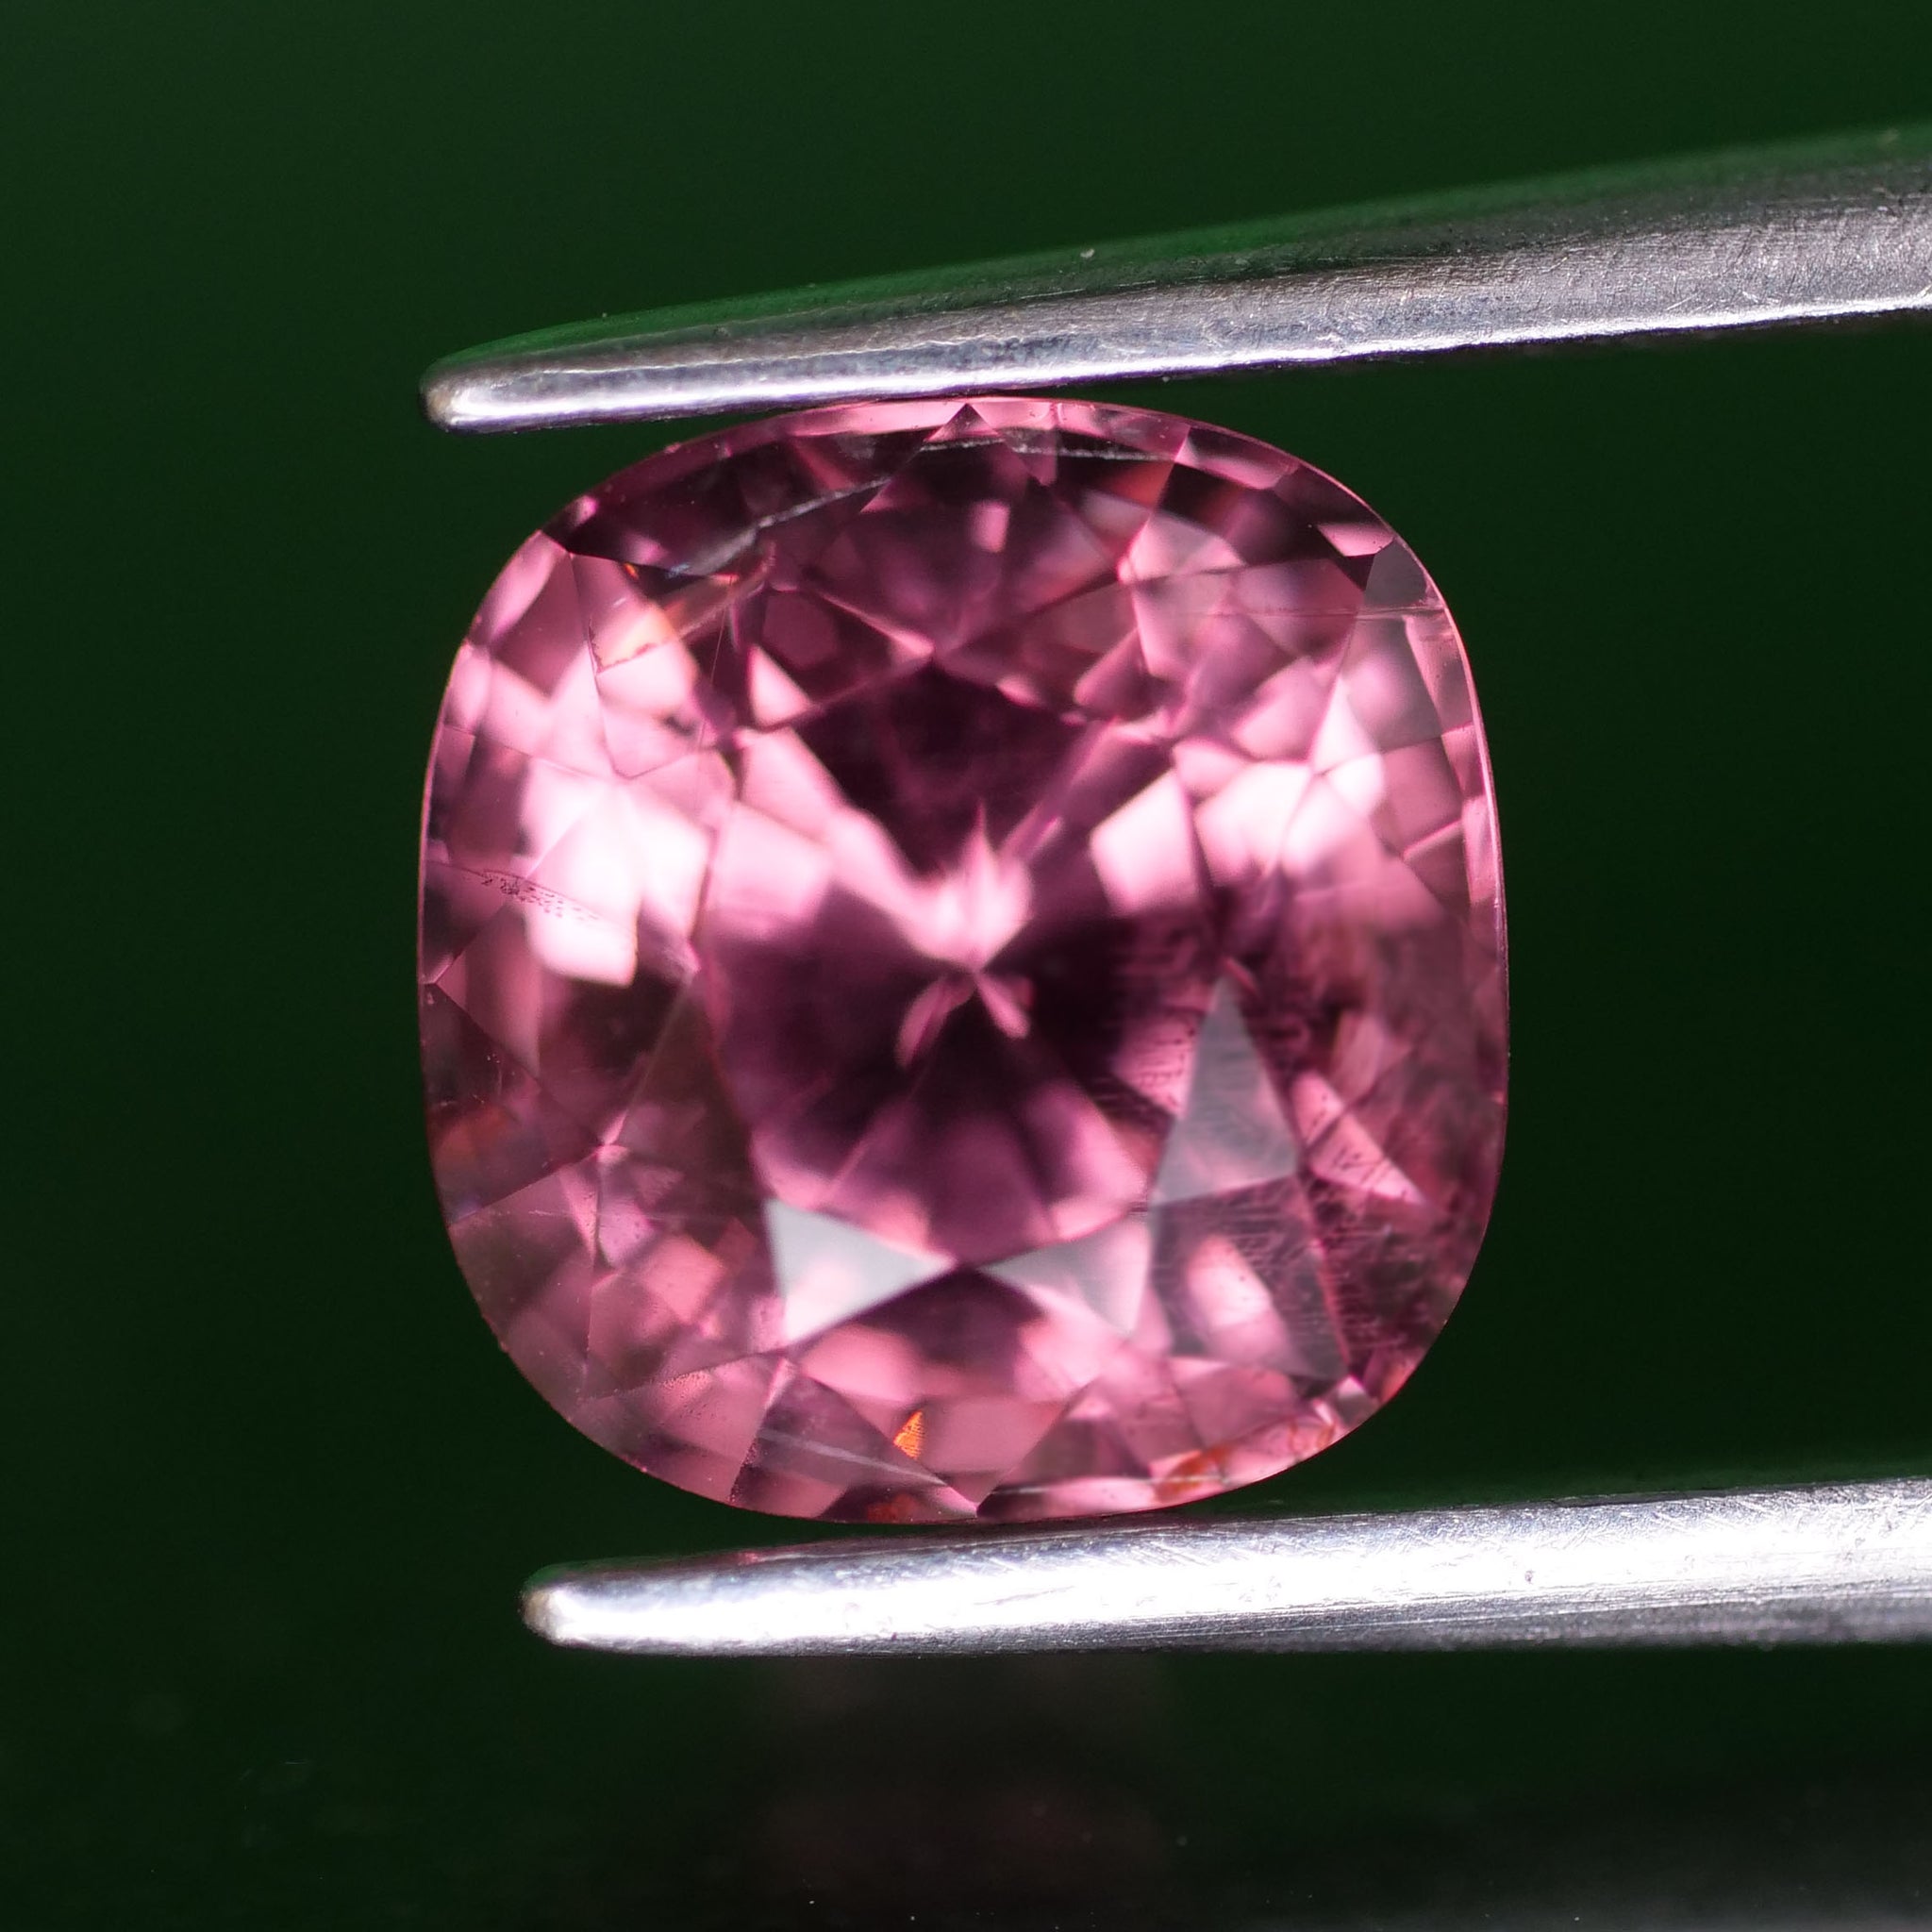 Pink Spinel | natural, candy pink color, cushion cut *7mm, VS, 2.68ct - Eden Garden Jewelry™